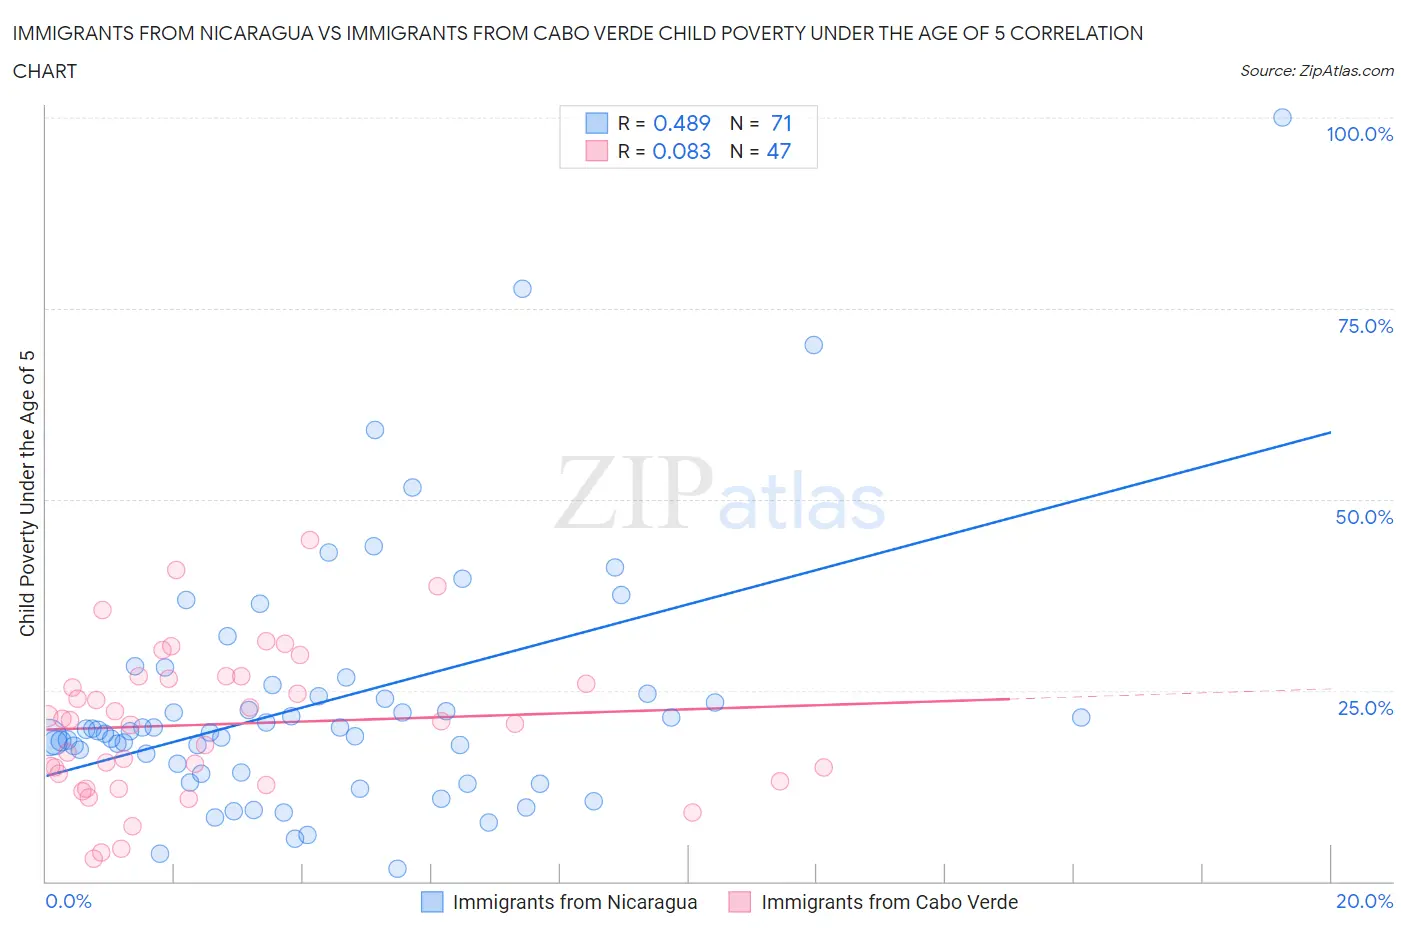 Immigrants from Nicaragua vs Immigrants from Cabo Verde Child Poverty Under the Age of 5